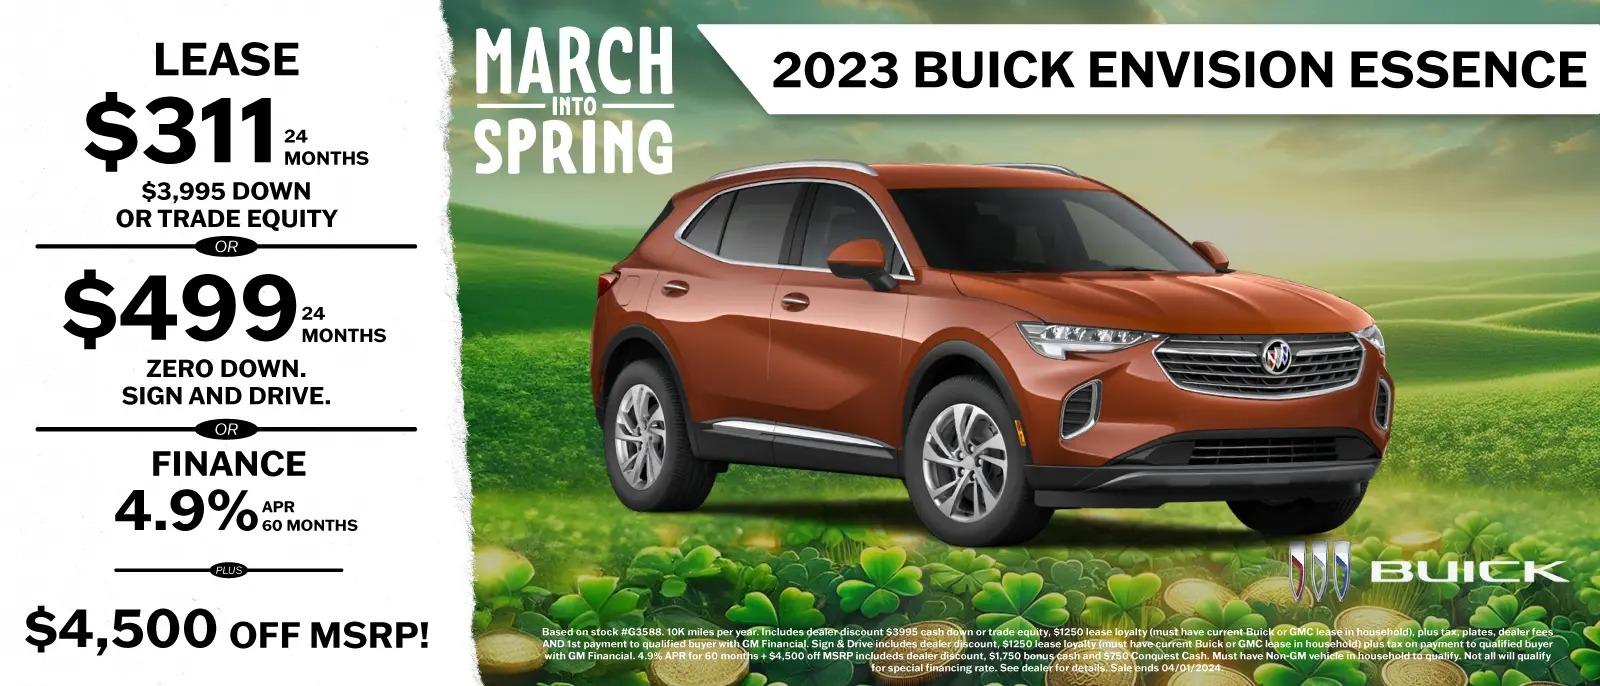 MARCH24 BUICK ENVISION